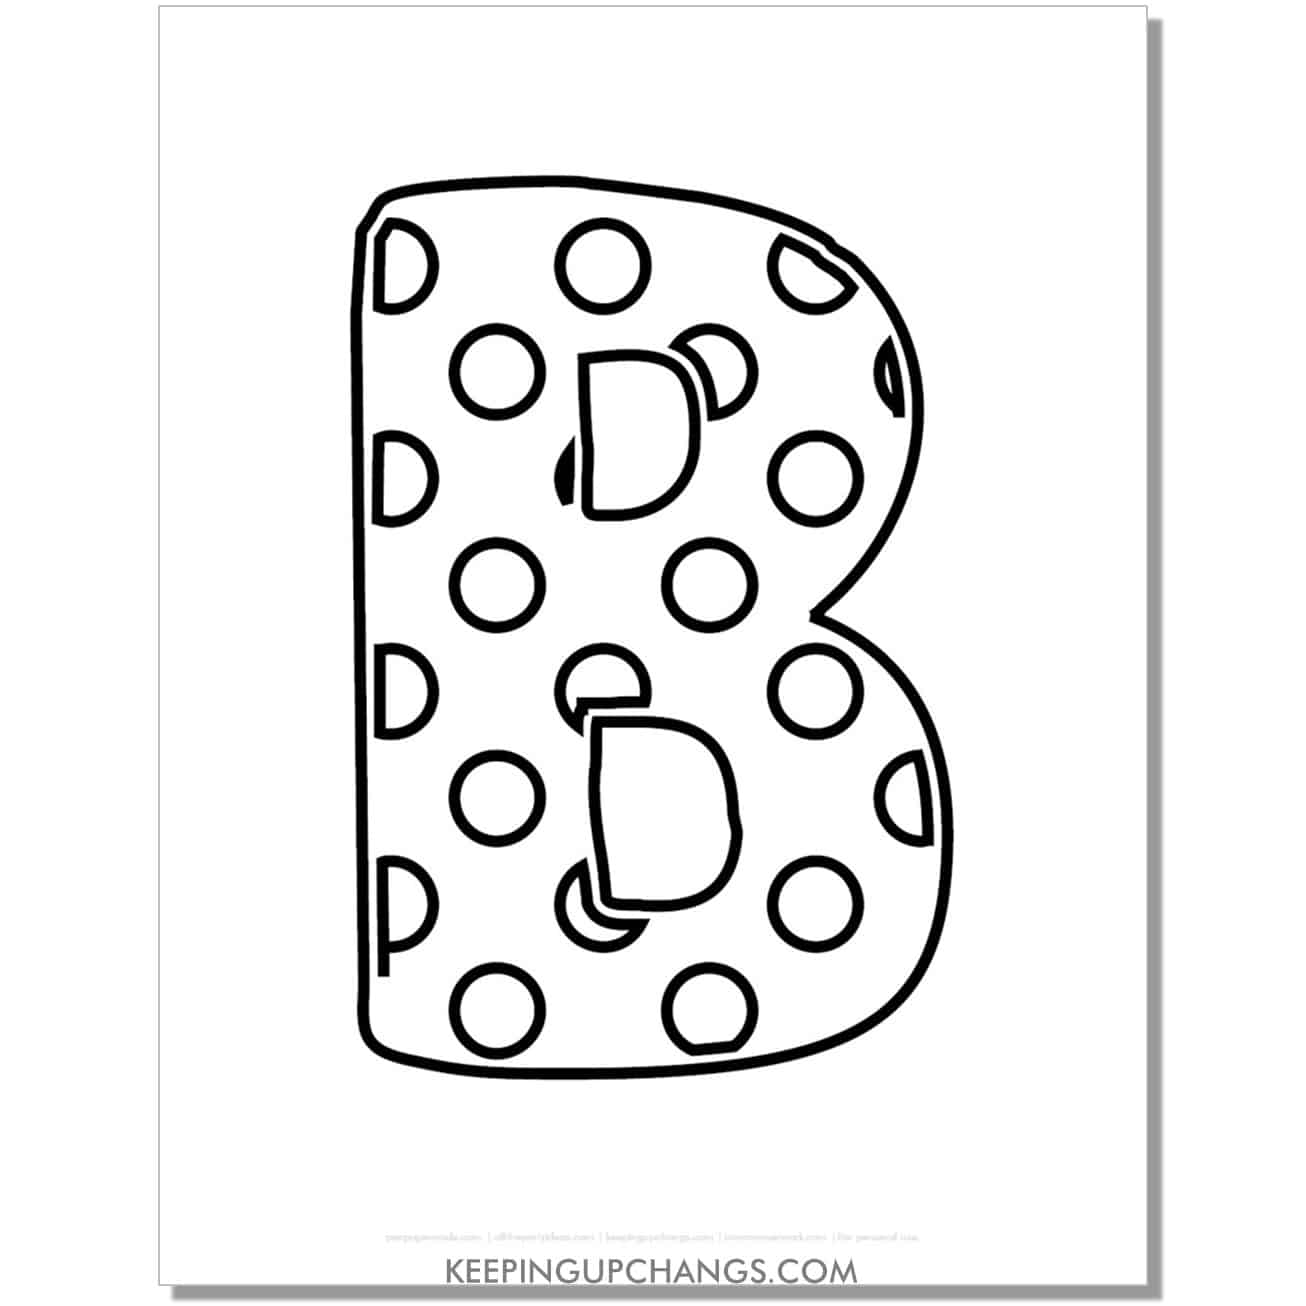 free alphabet letter b coloring page with polka dots for toddlers, preschool, kindergarten.